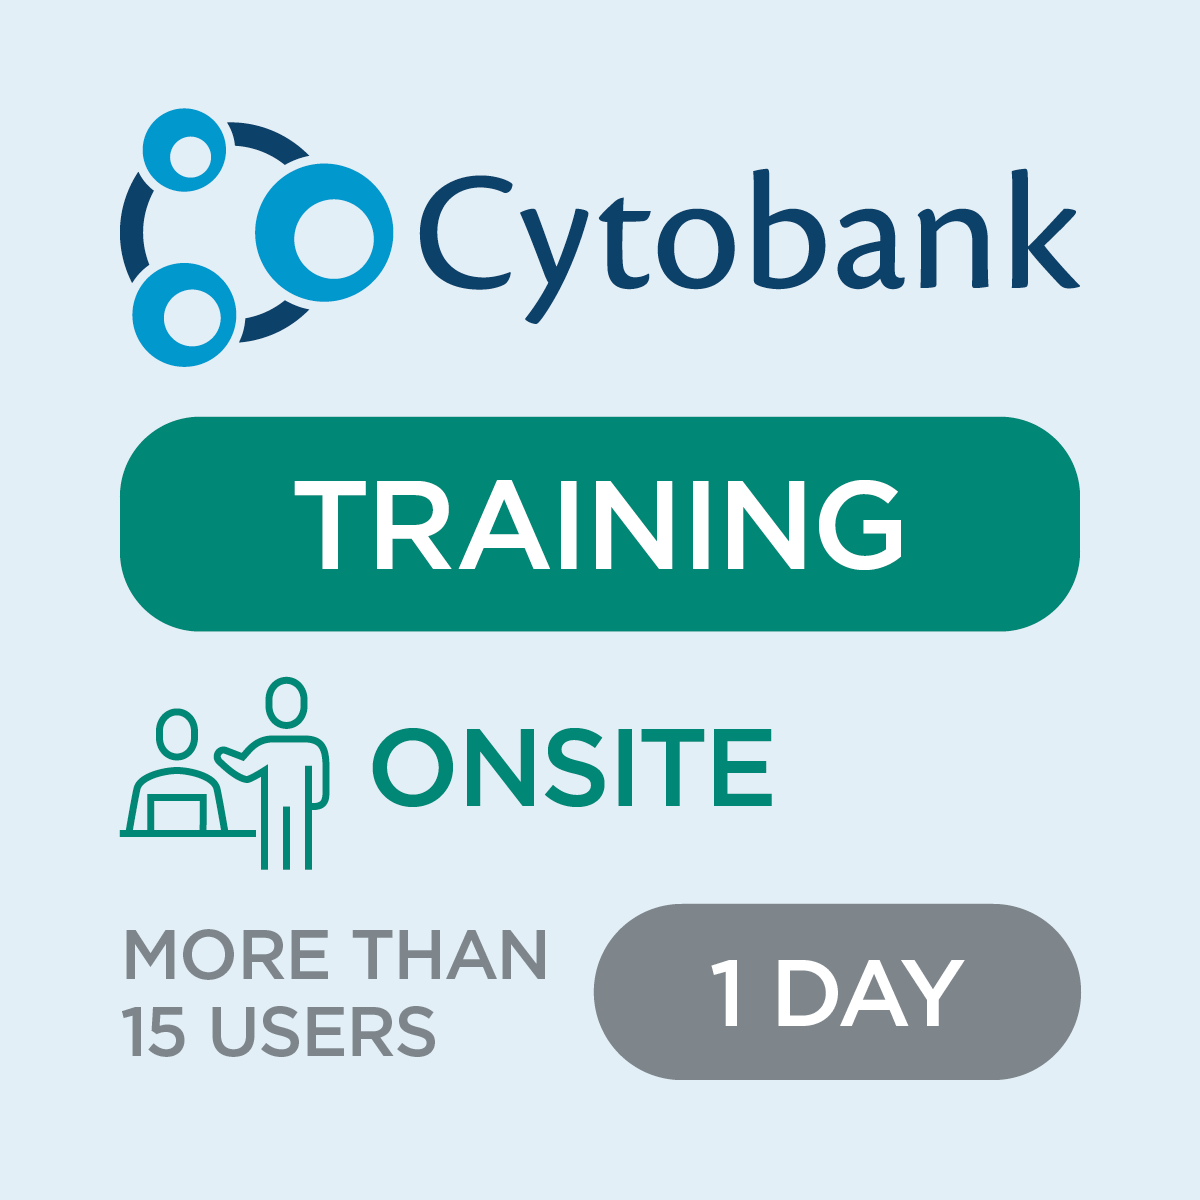 c47407,  Onsite Cytobank Training, More-than-15-users, 1-day